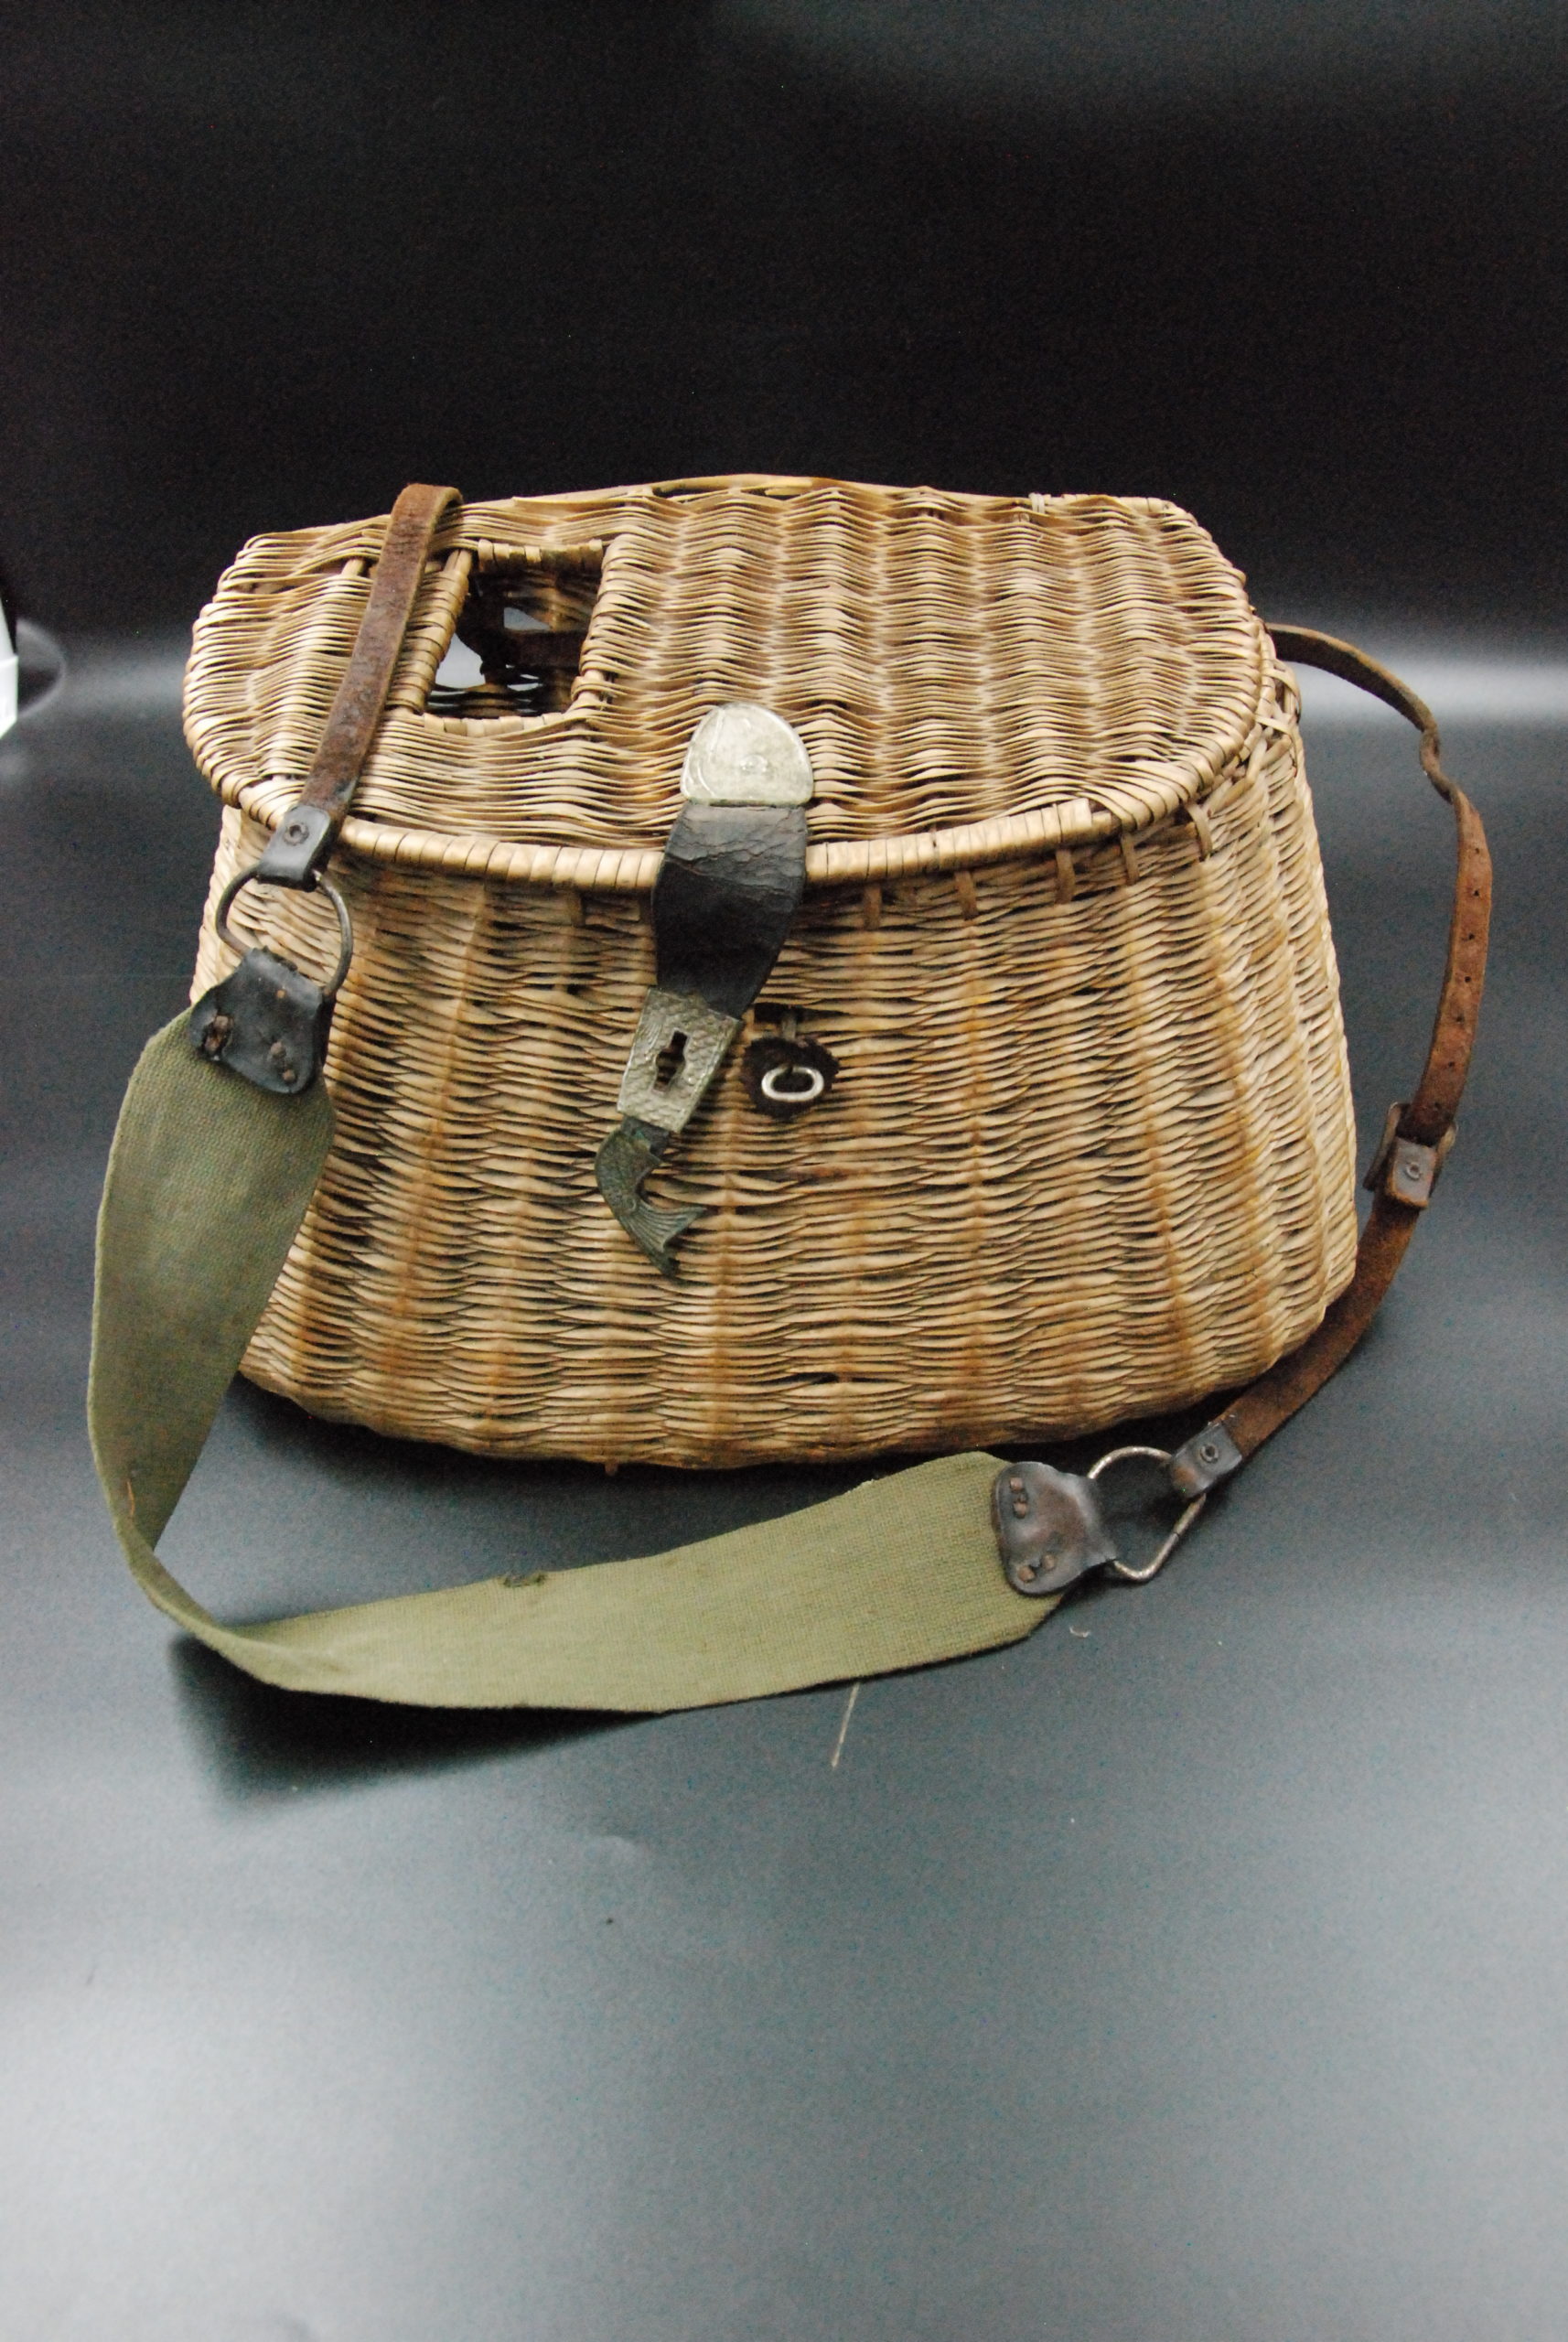 Vintage fly fishing wicker creel basket - collectibles - by owner - sale -  craigslist